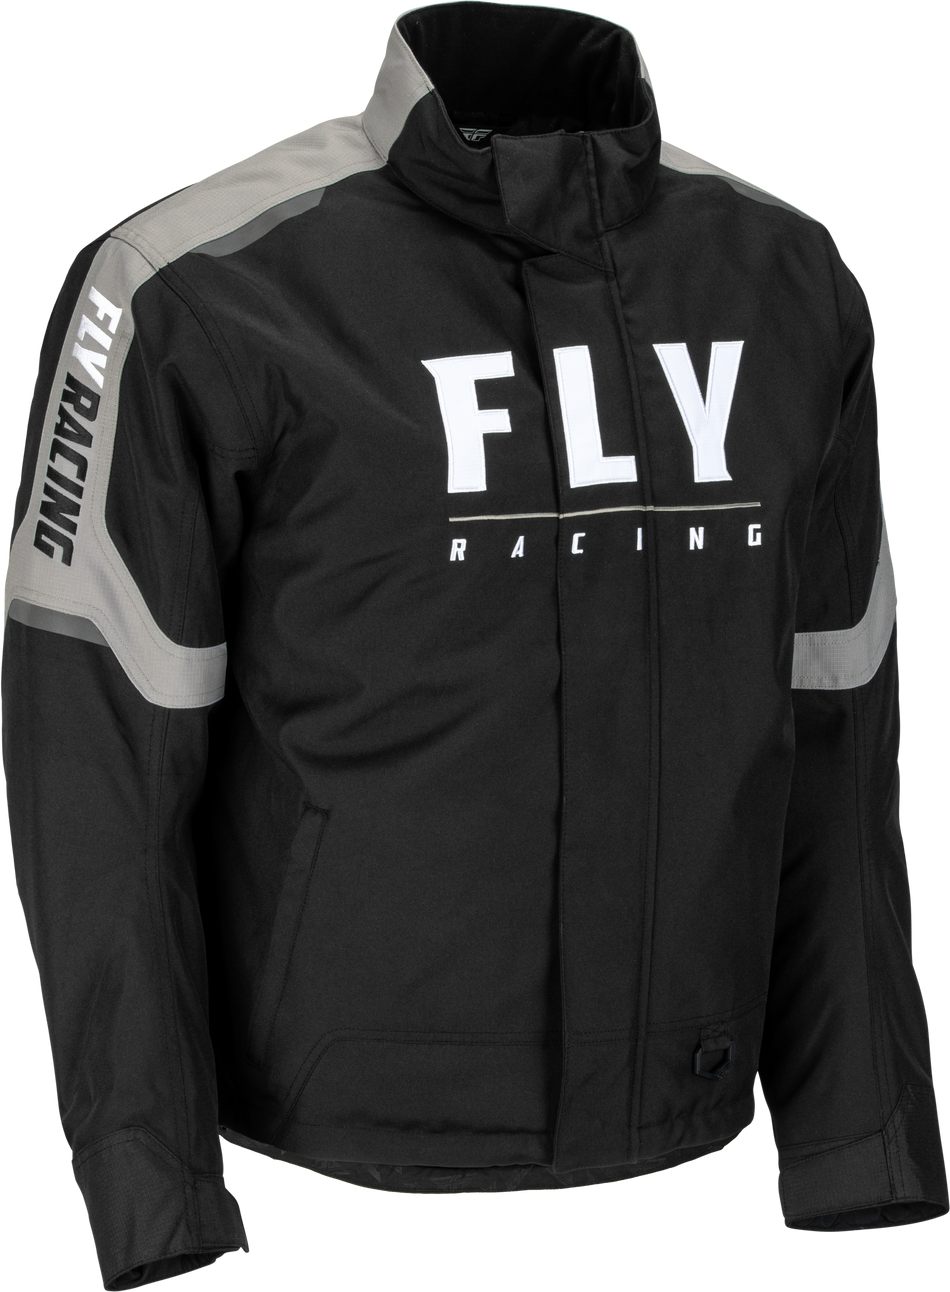 FLY RACING Outpost Jacket Black/Grey Lg 470-4143L